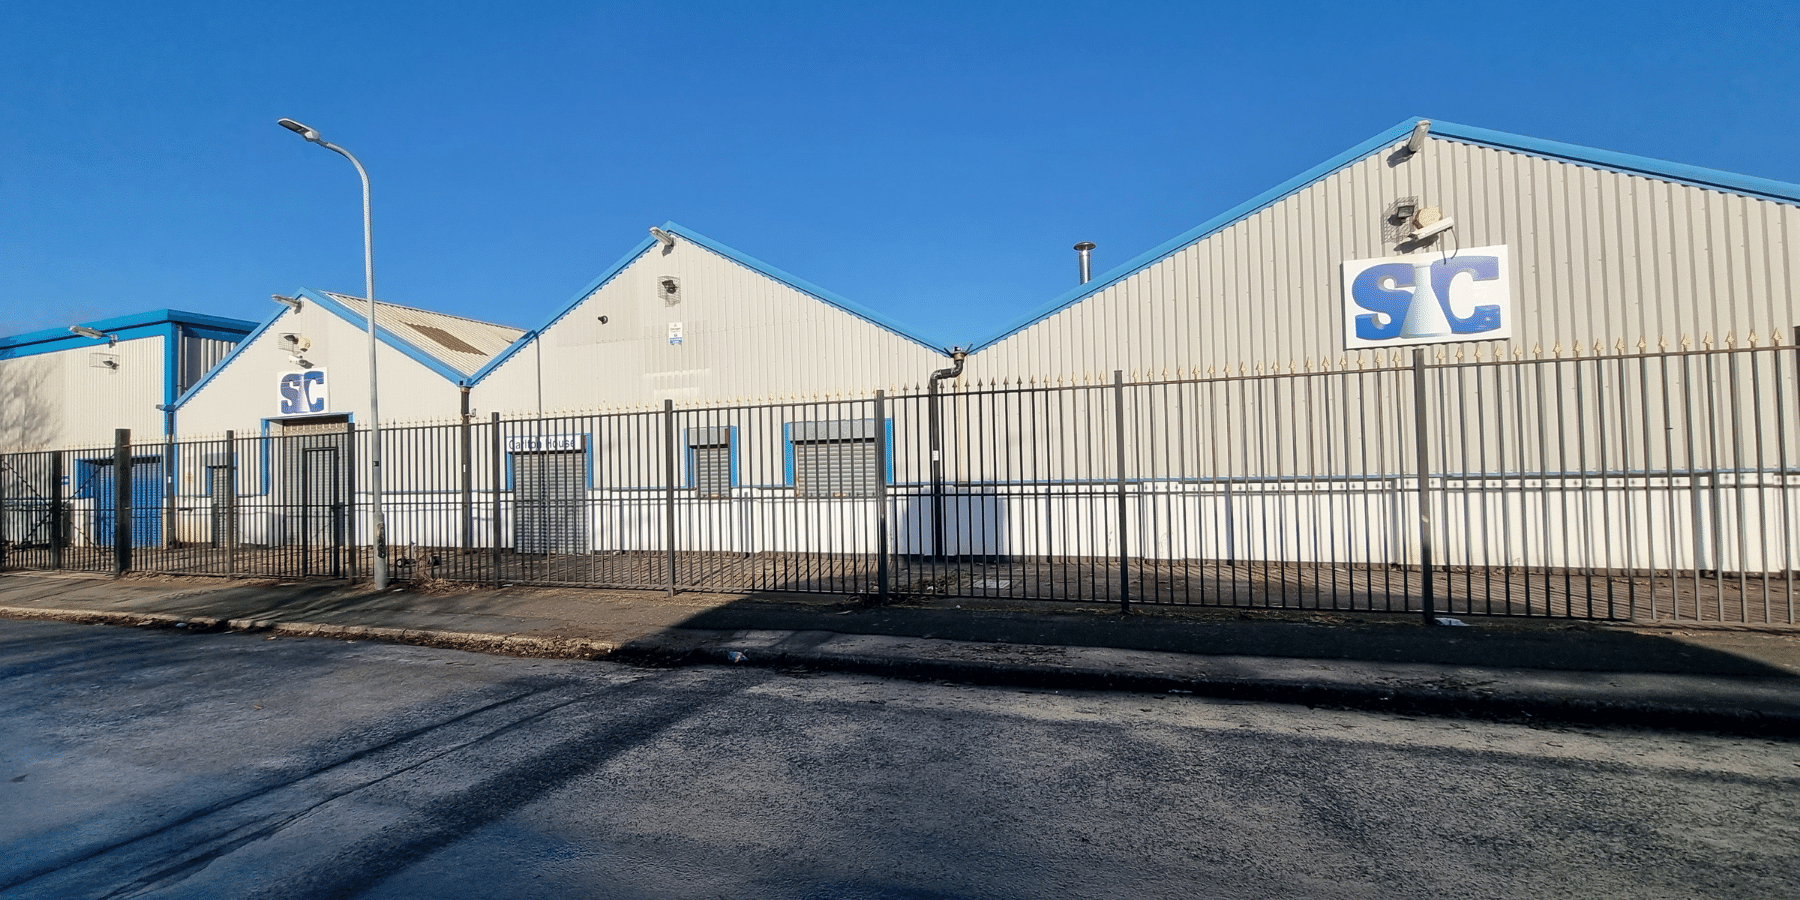 Reliance Trading Estate